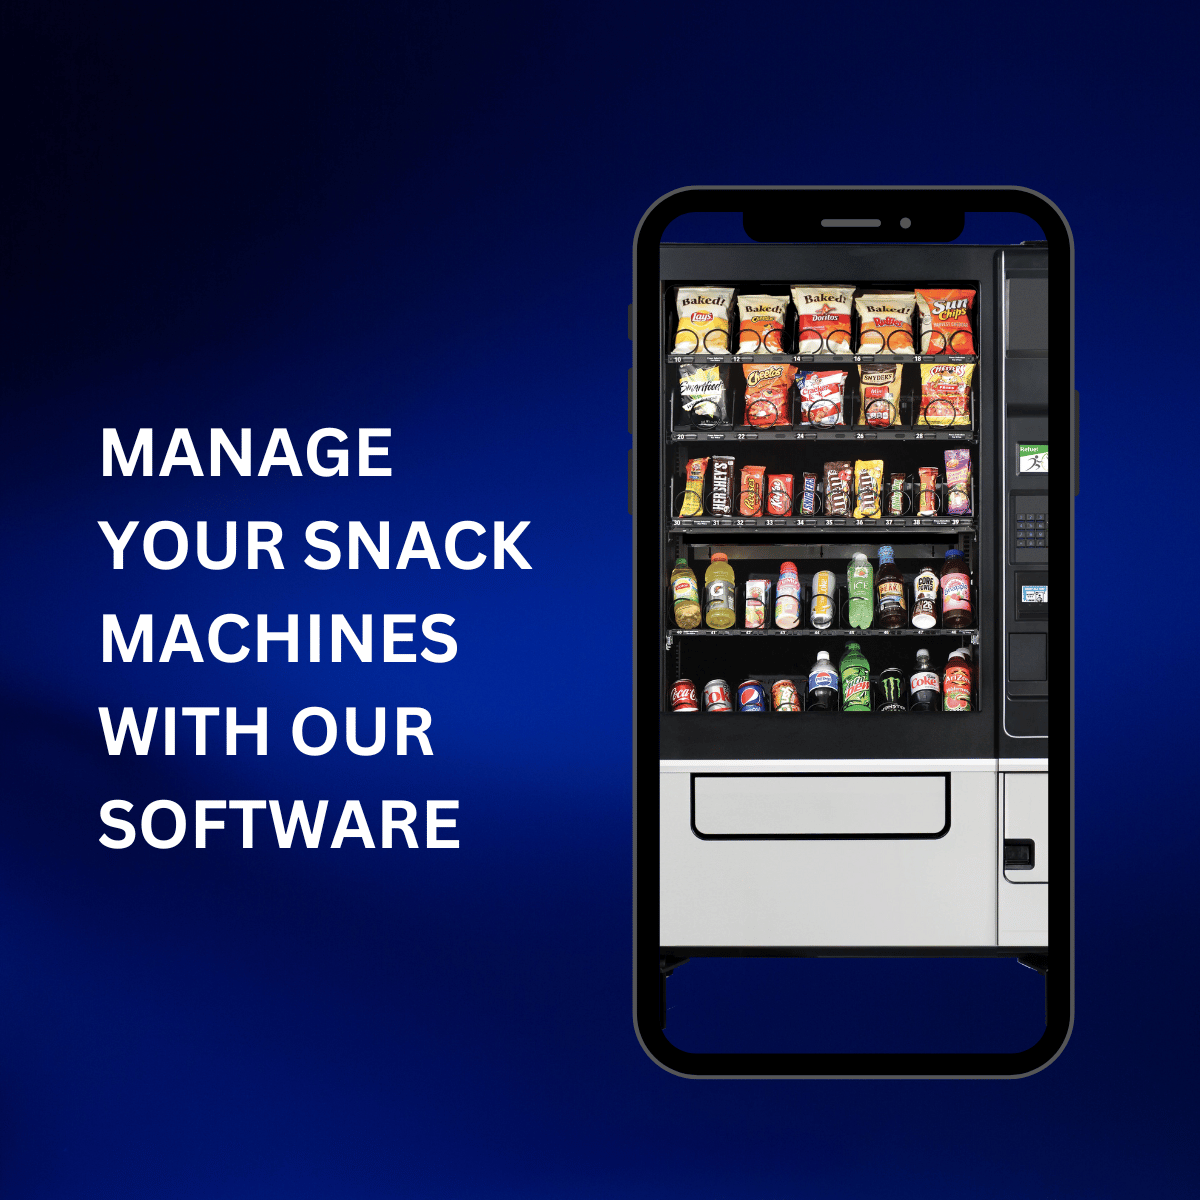 MANAGE YOUR SNACK MACHINES WITH OUR SOFTWARE